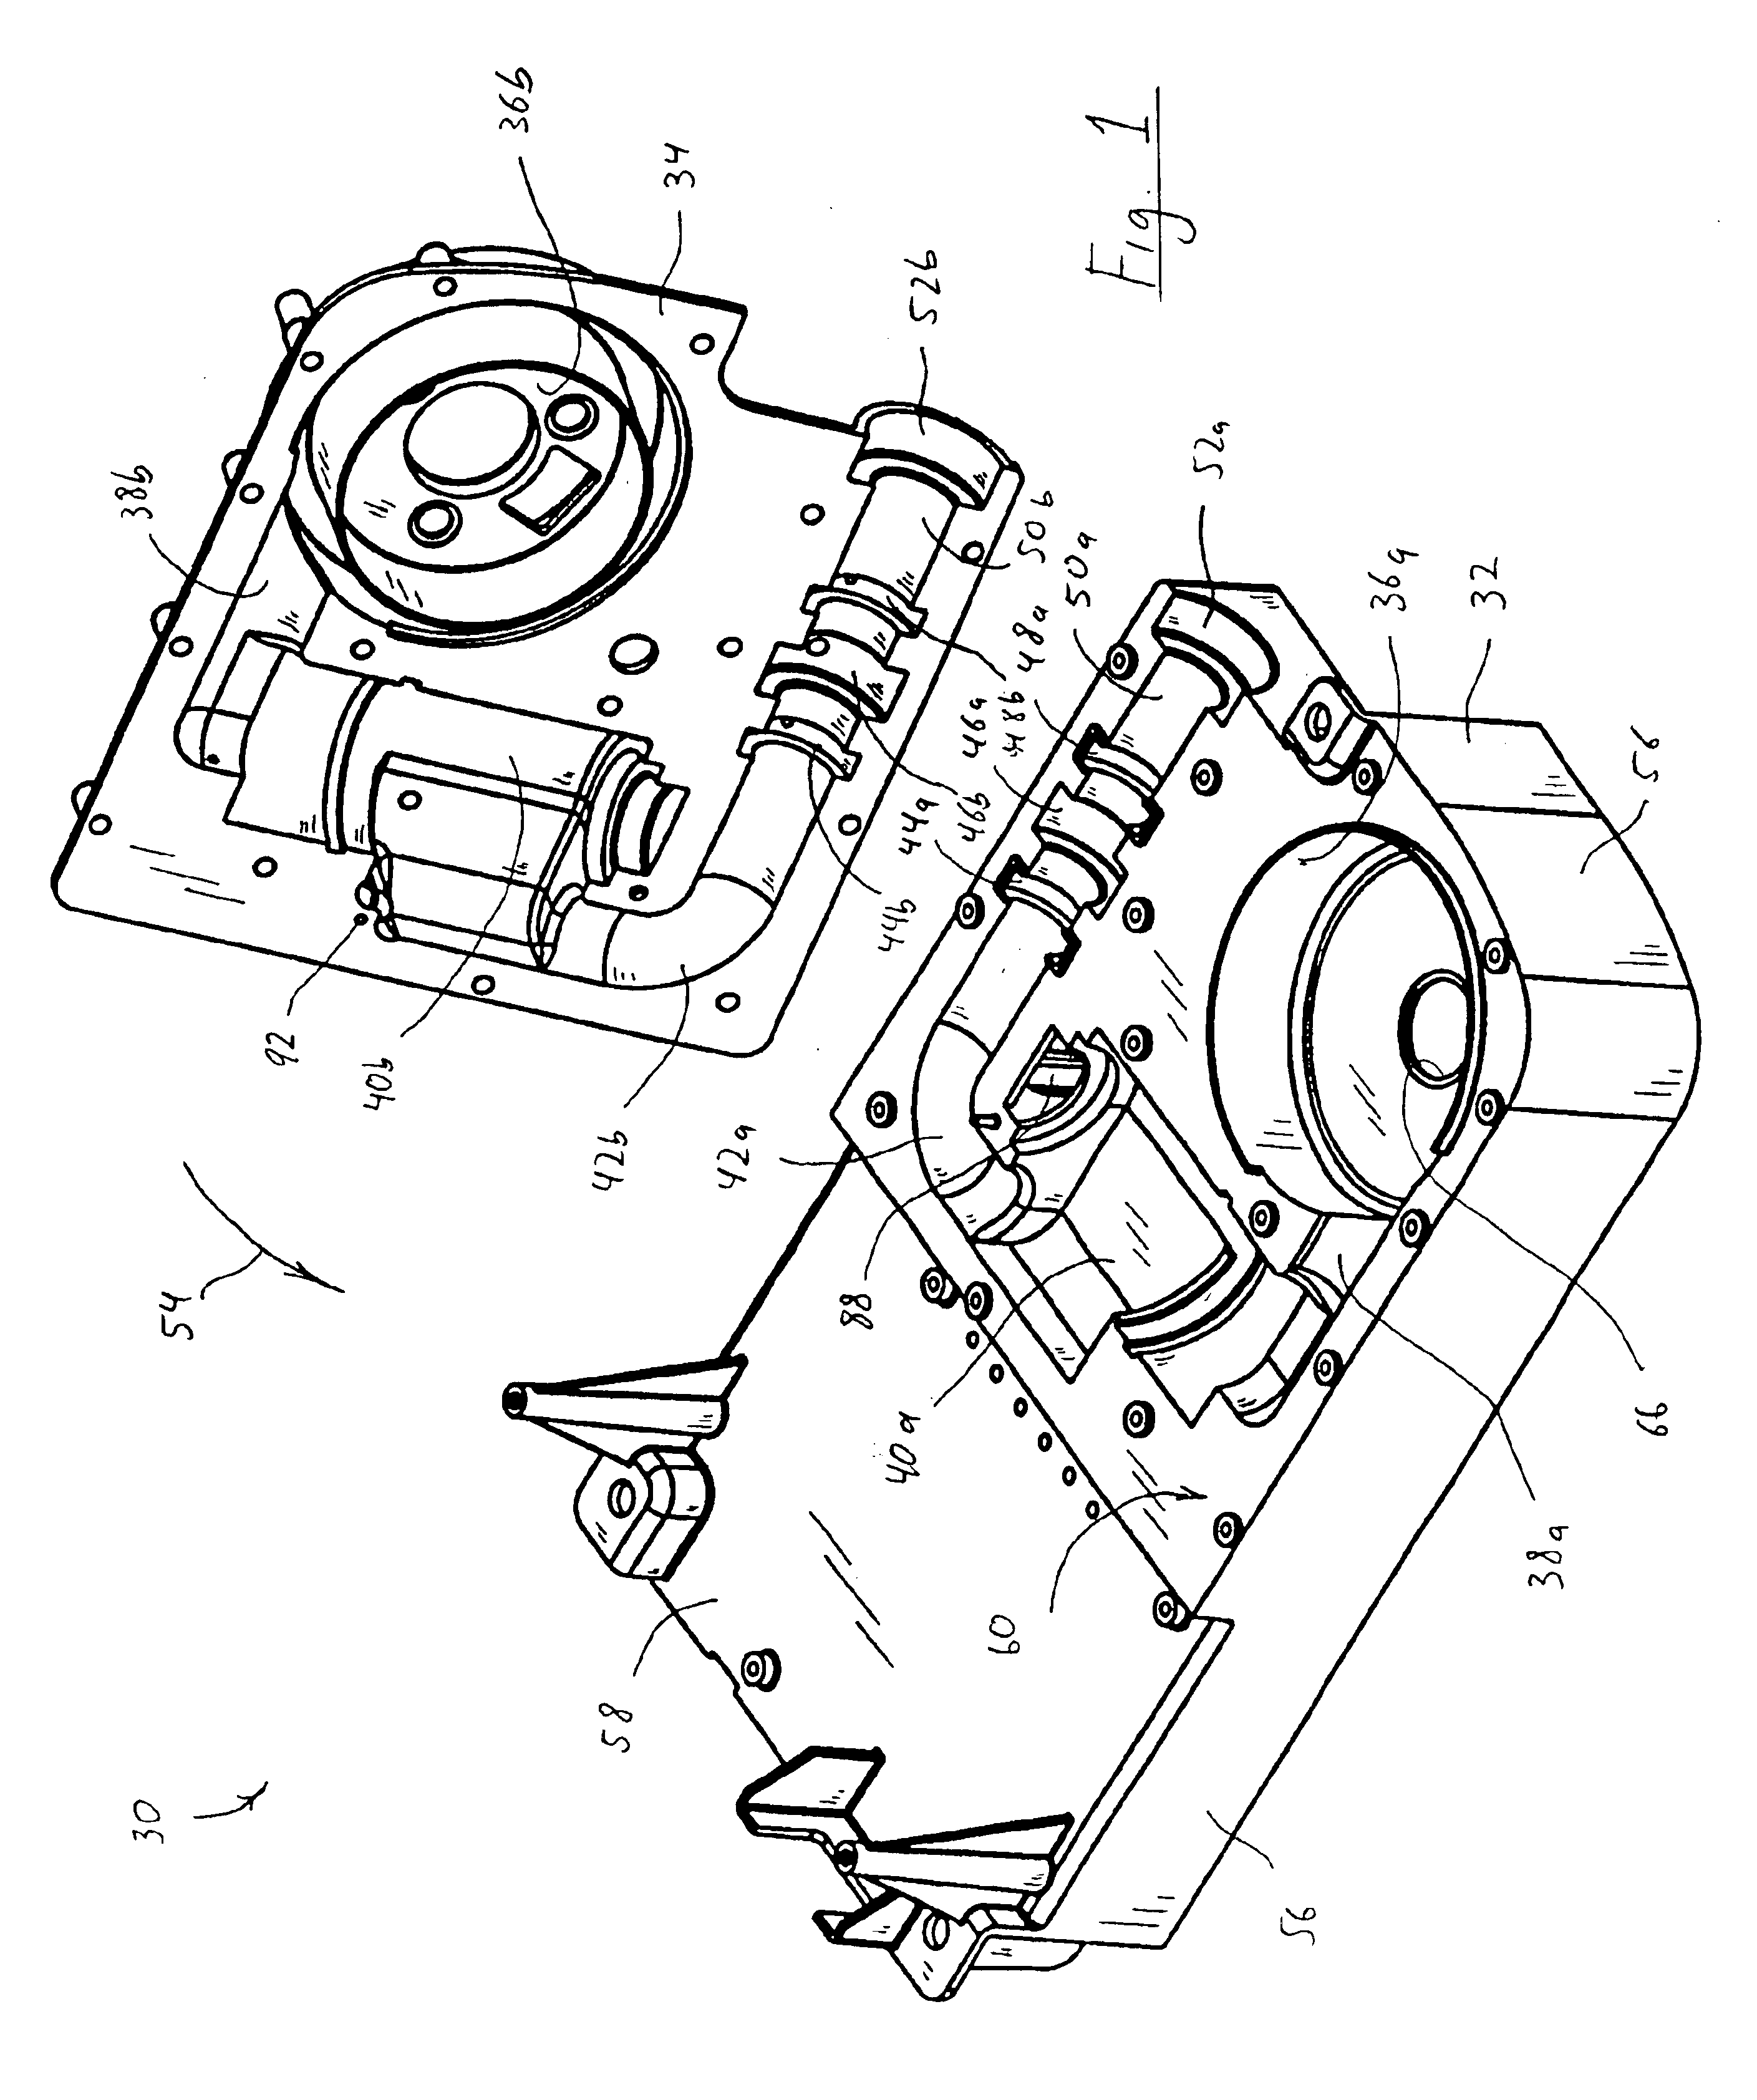 Pressure support system having a two-piece assembly